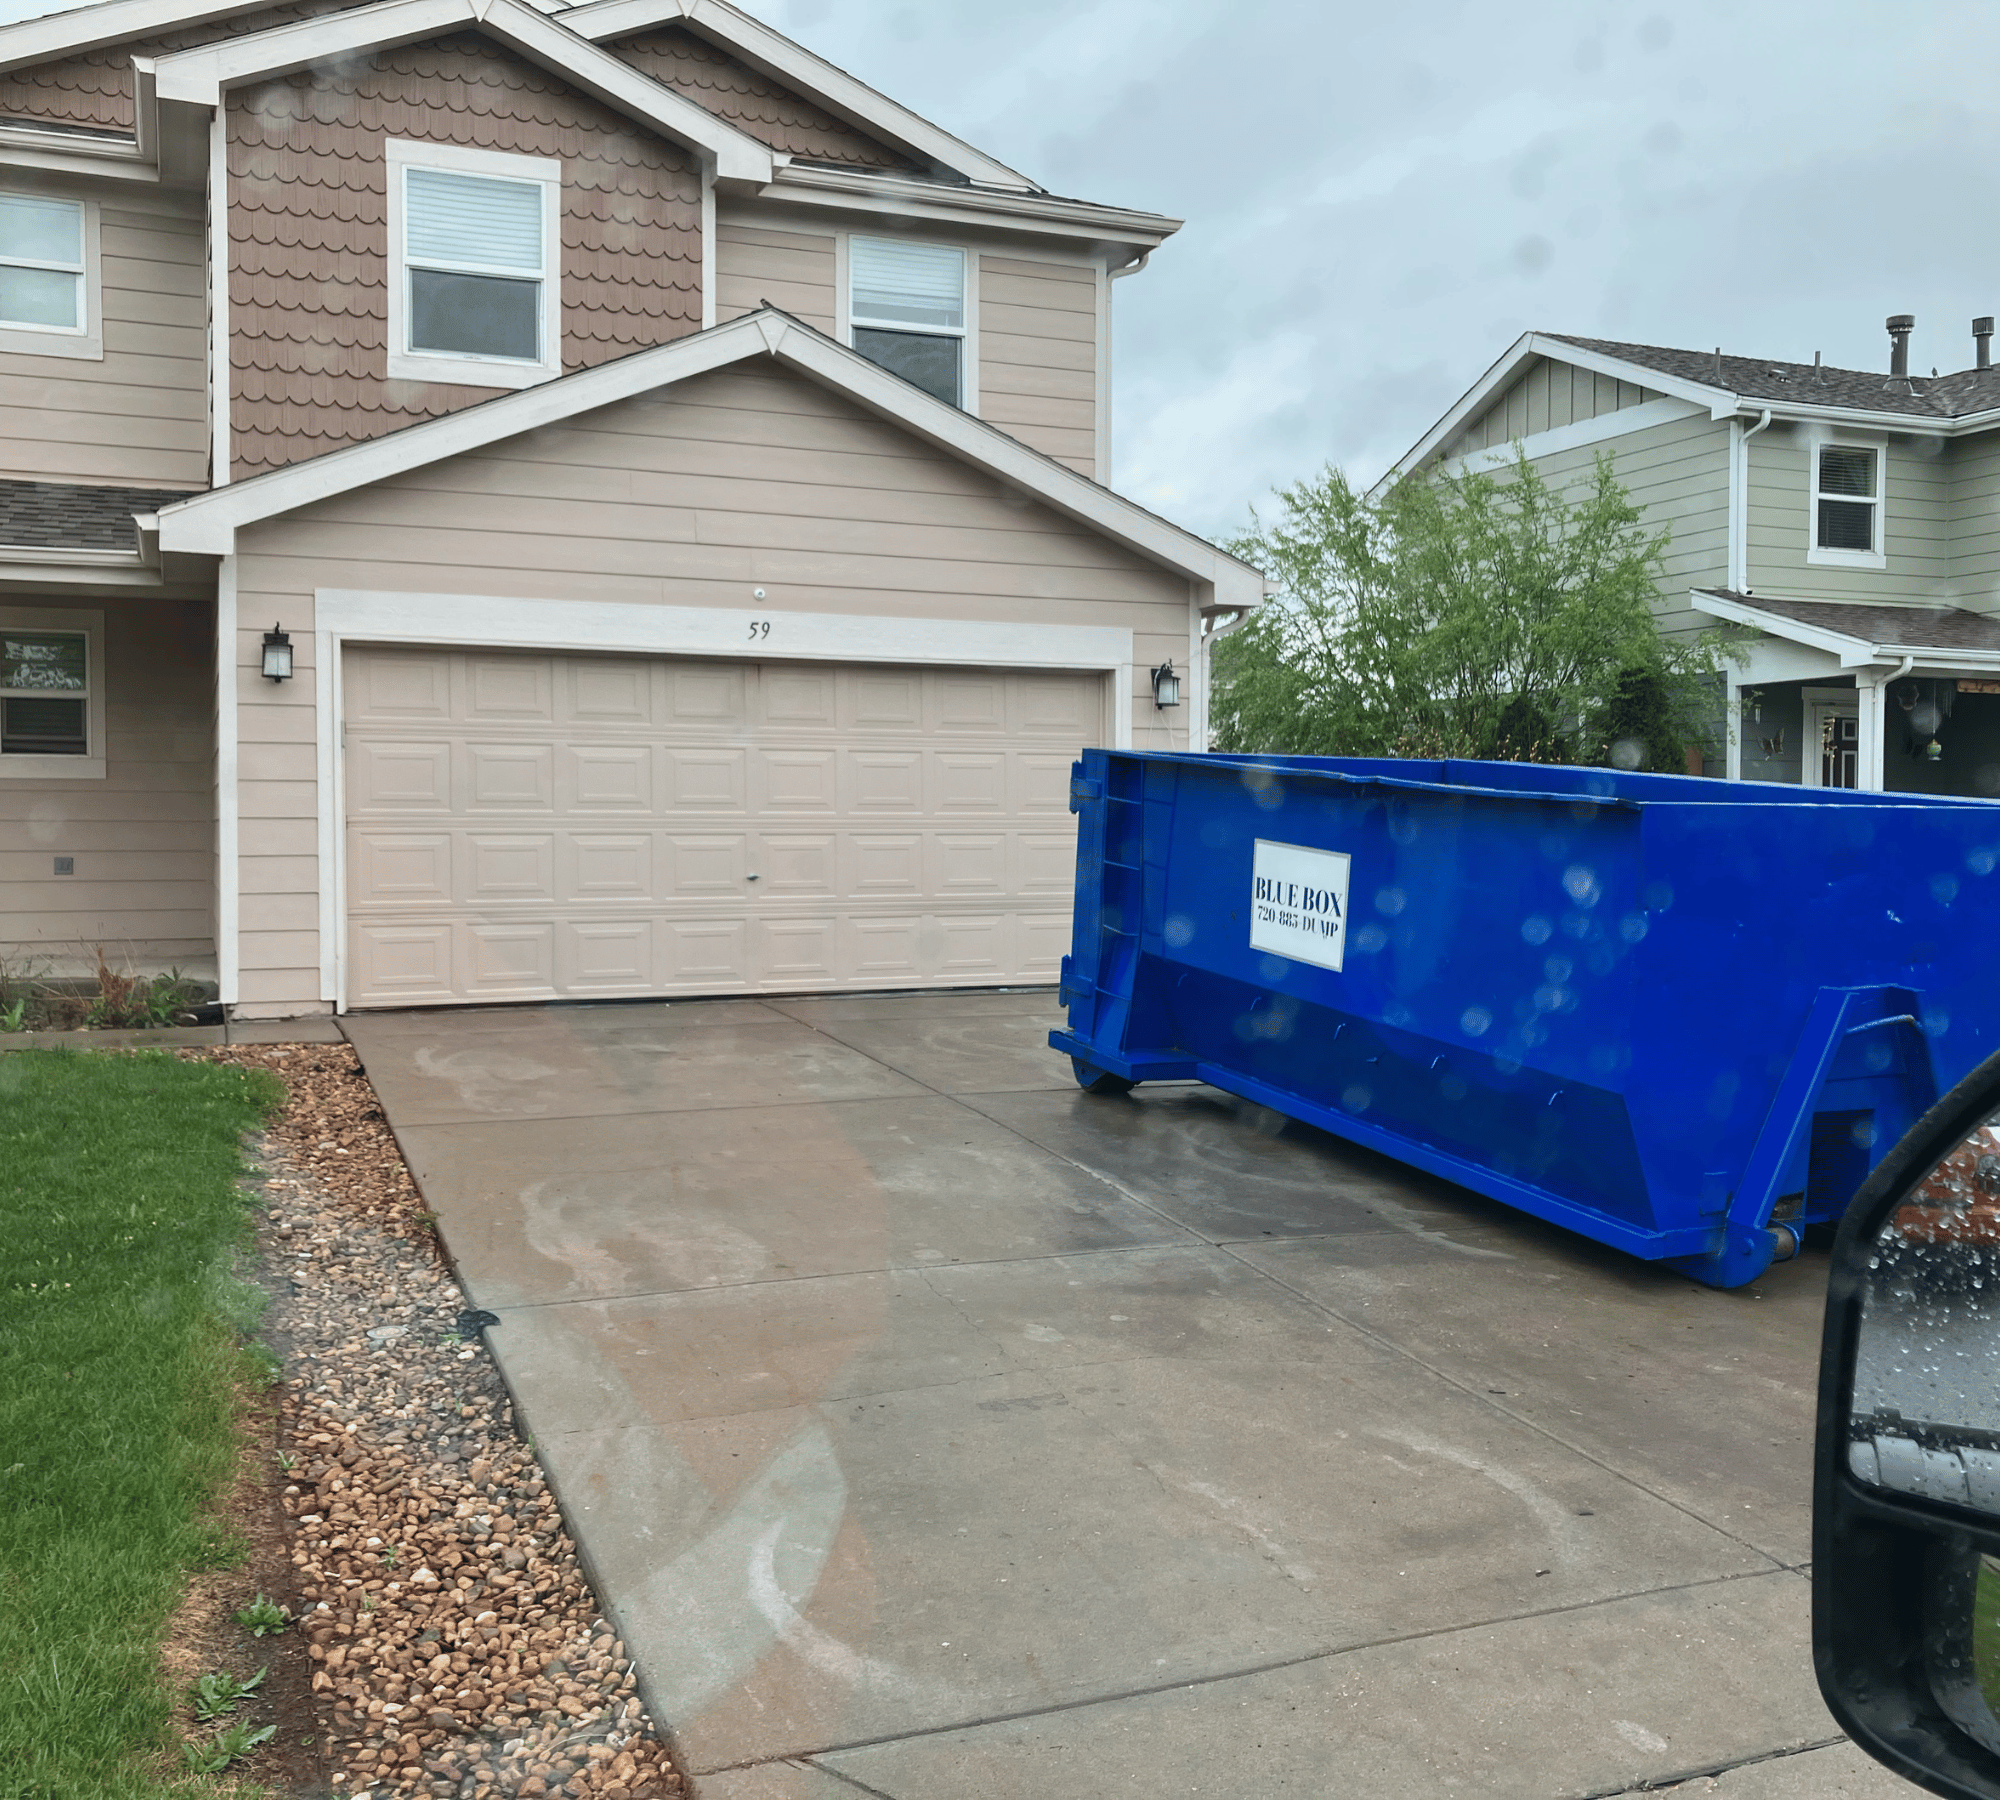 NEW YEAR’S RESOLUTION: USE ROLL-OFF DUMPSTERS FOR DECLUTTERING